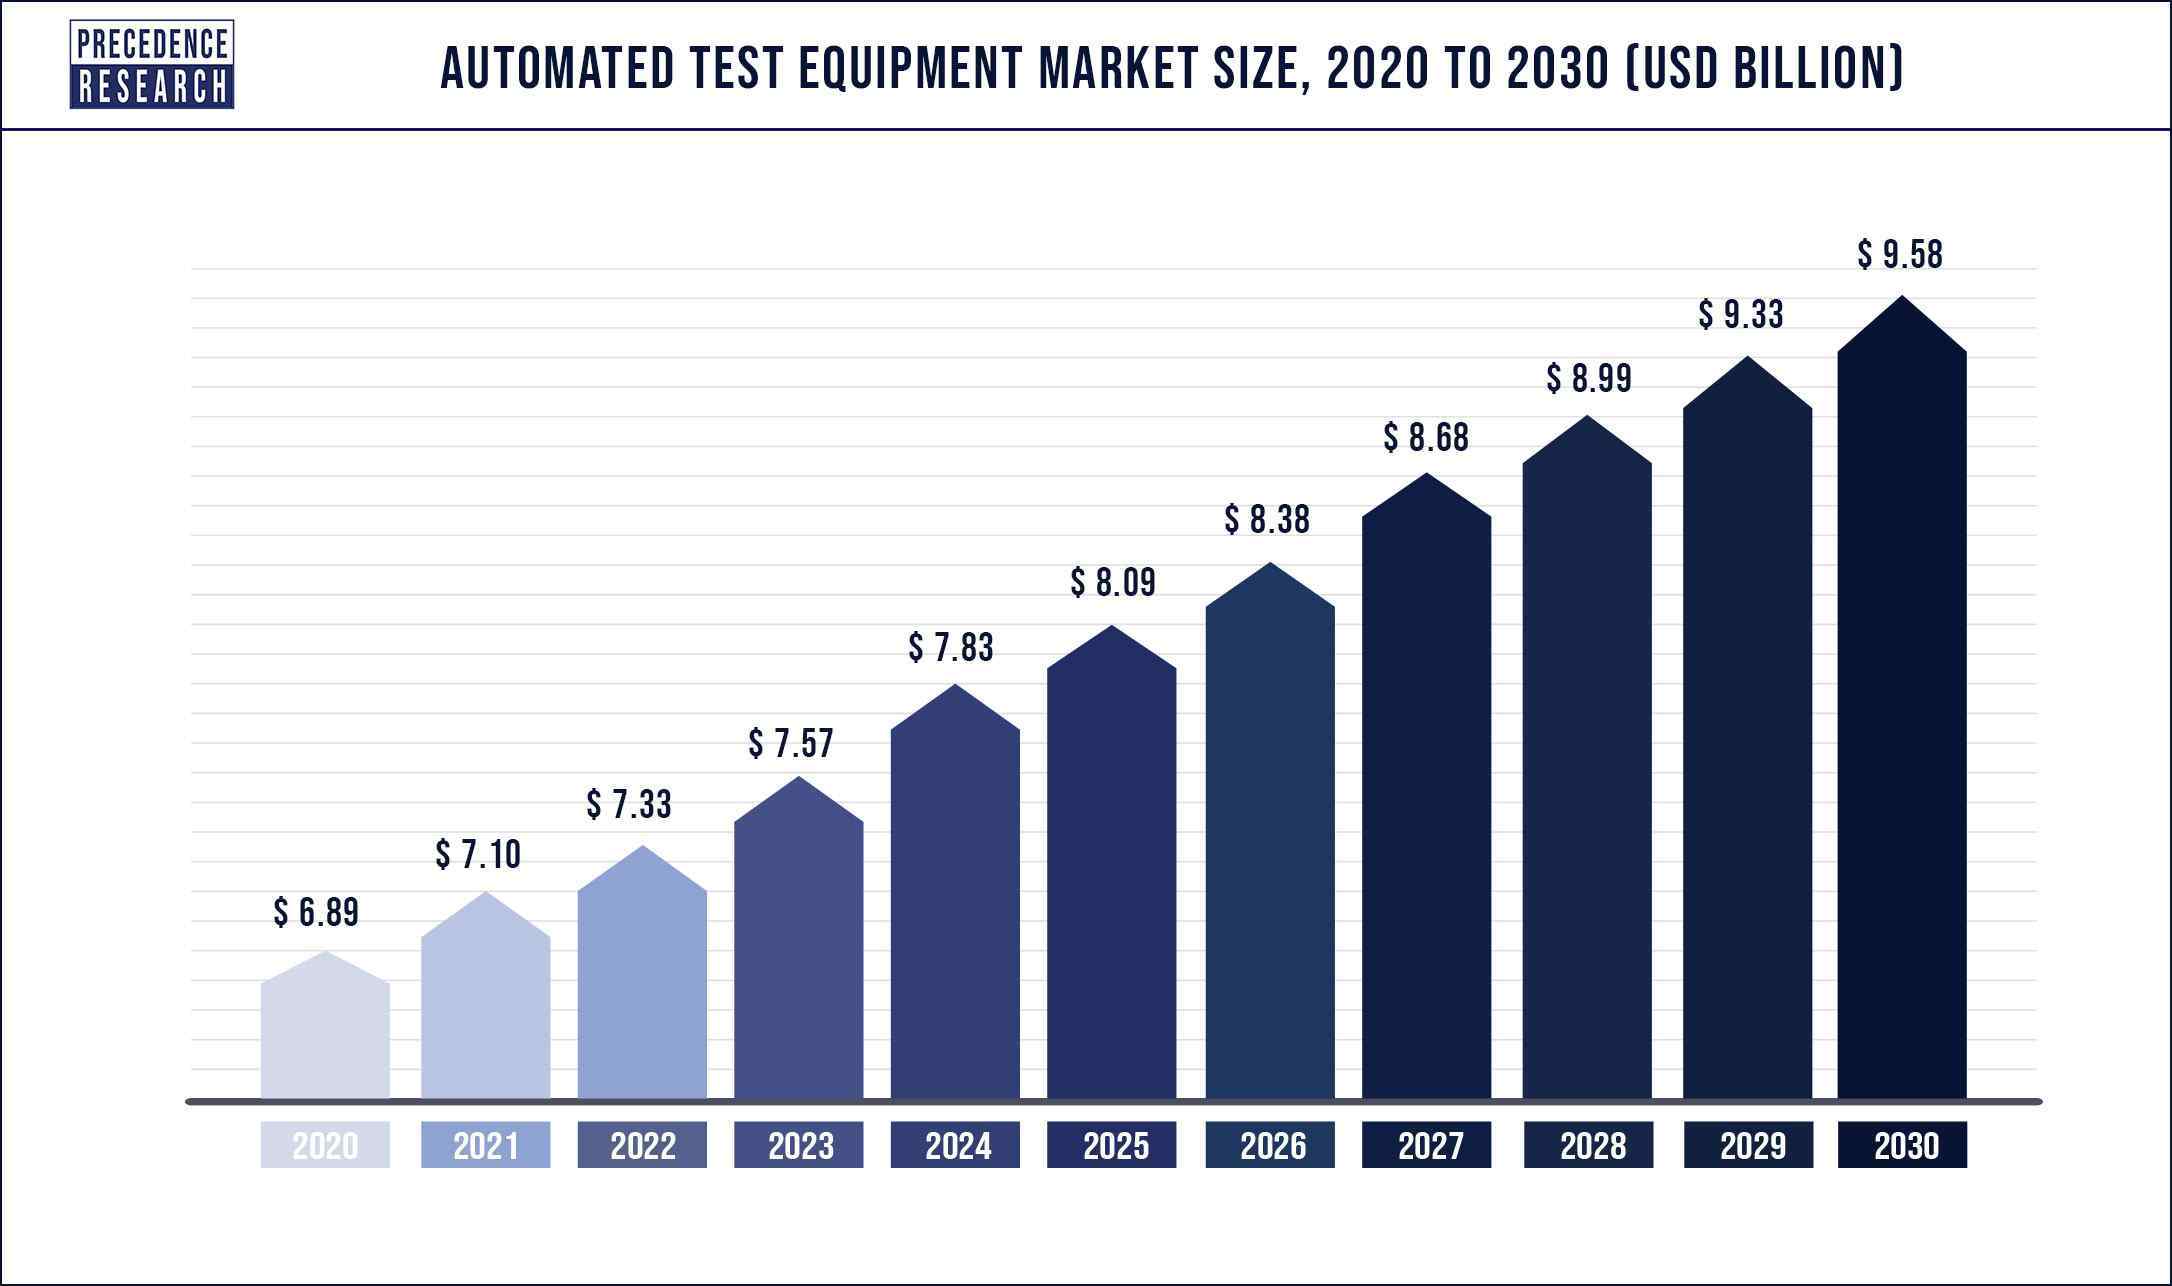 Automated Test Equipment Market Size 2020 to 2030